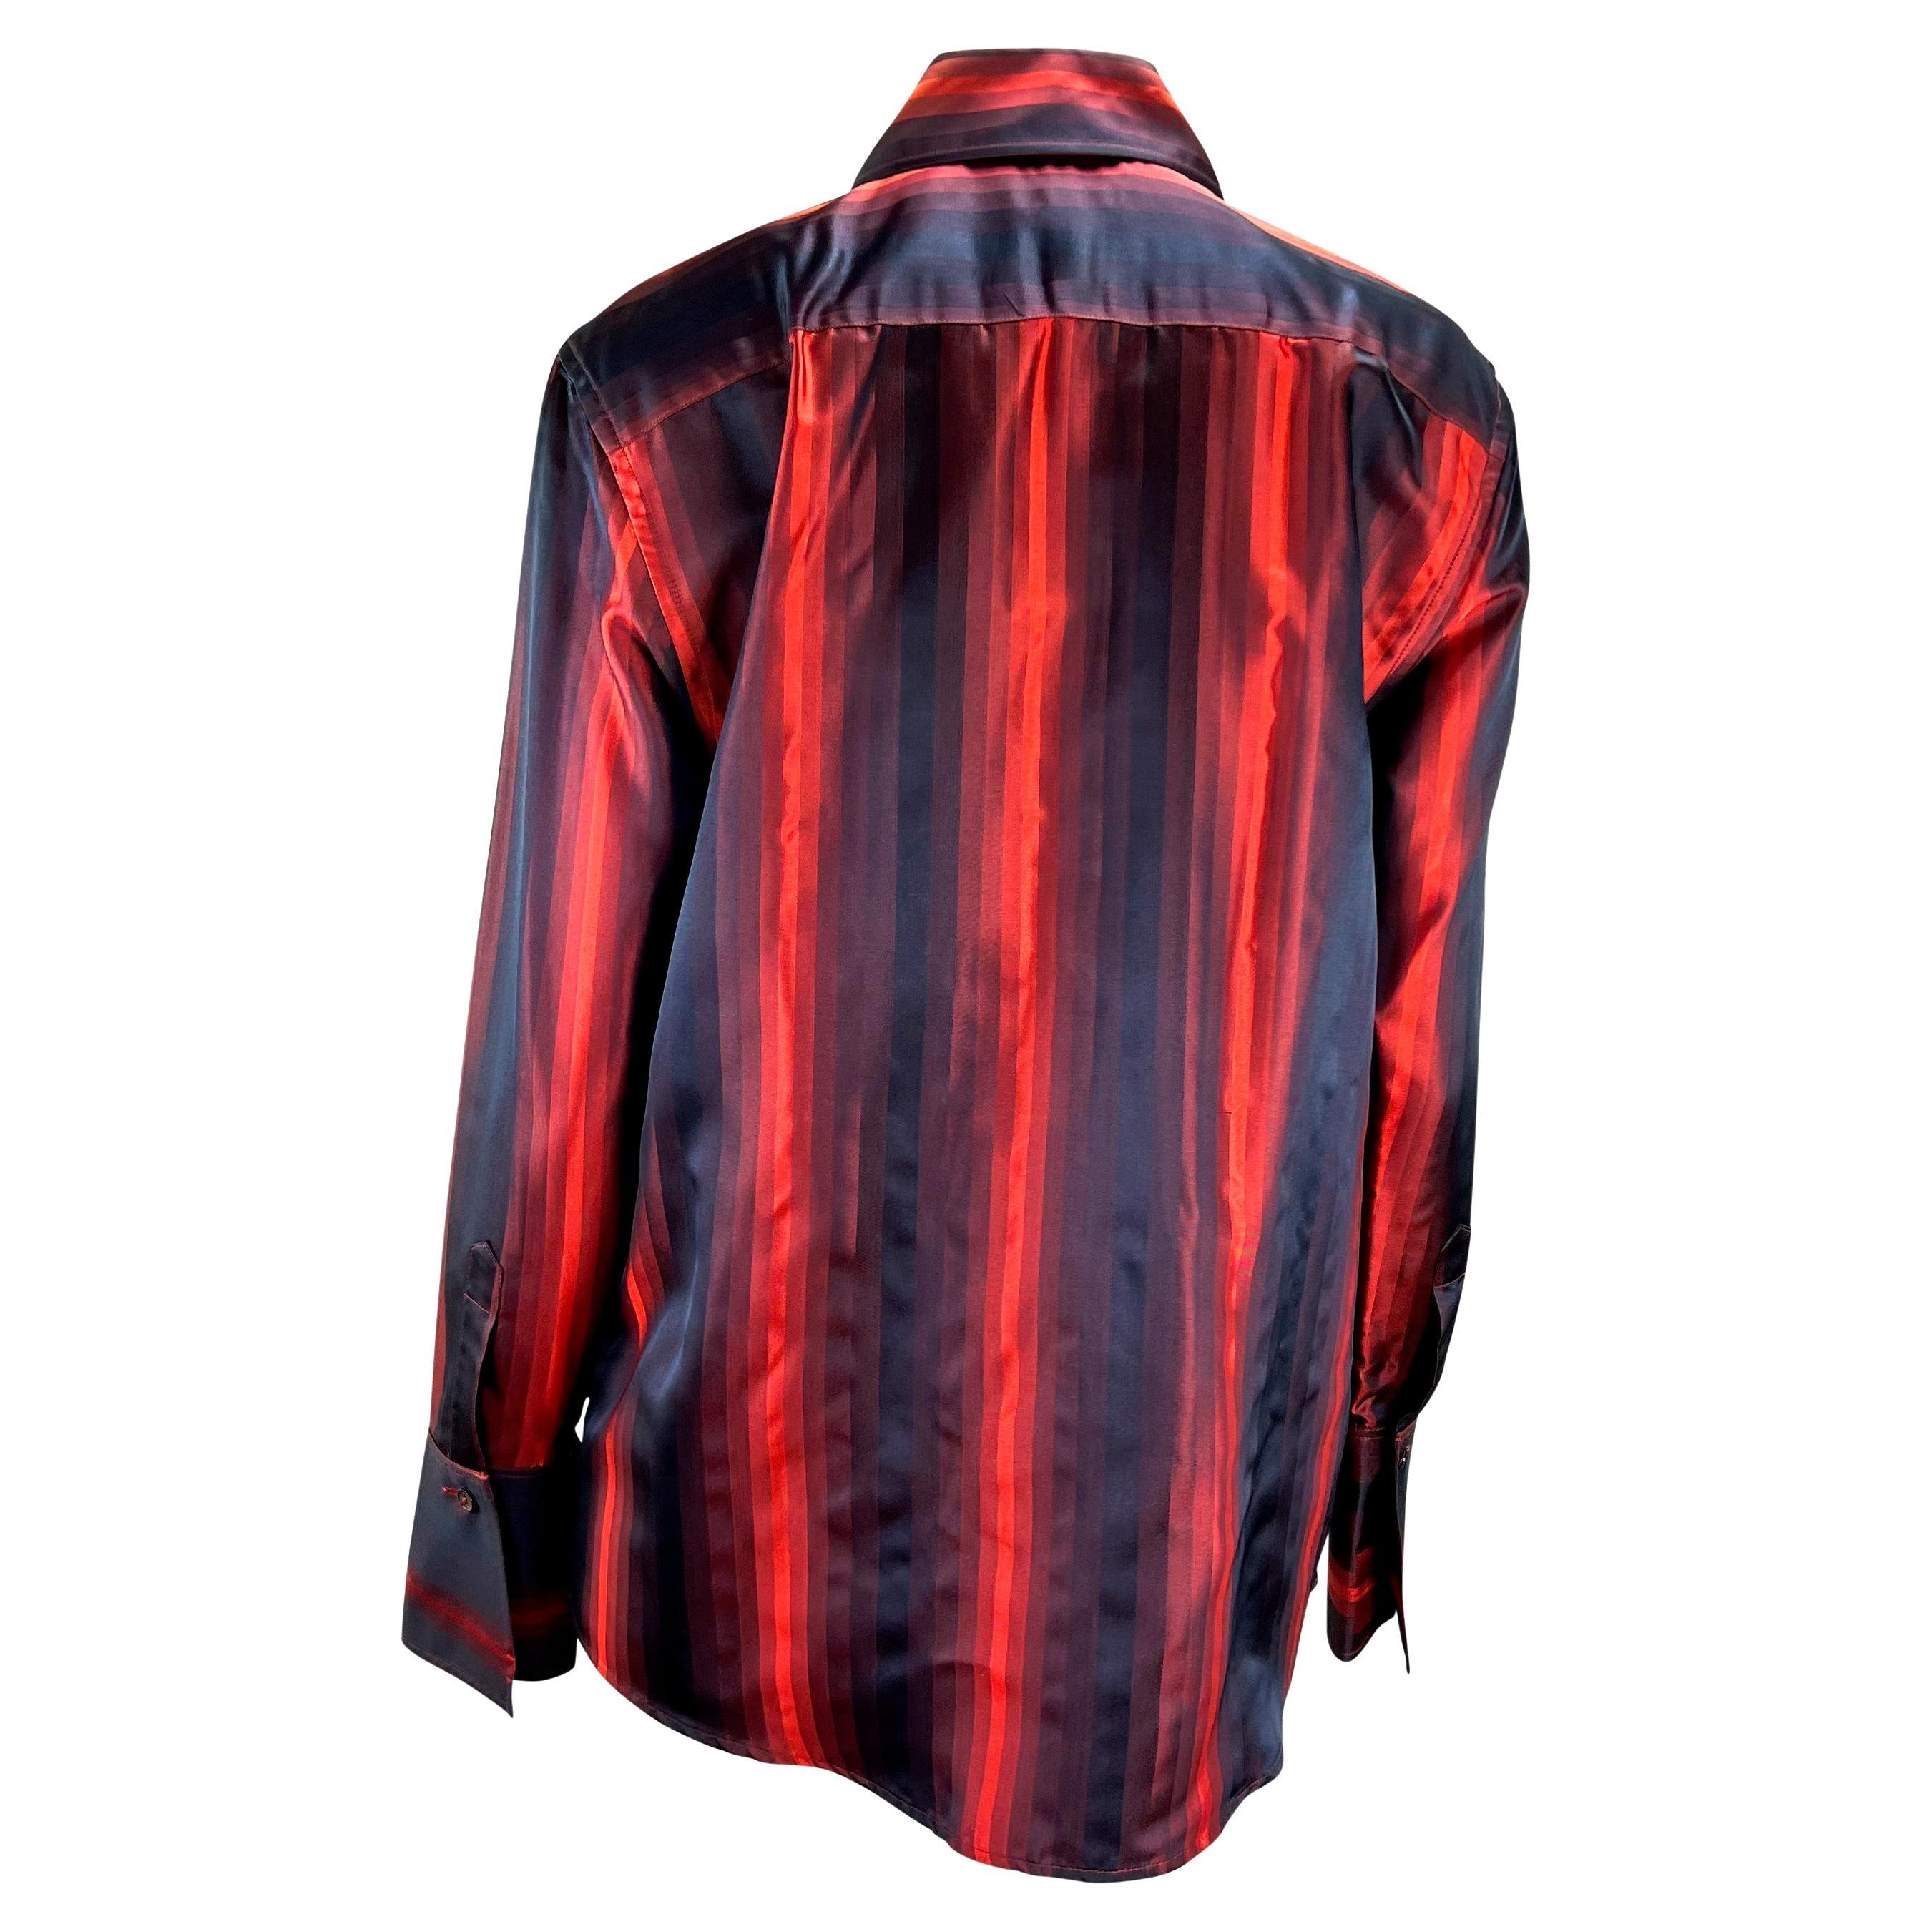 F/W 1997 Gucci by Tom Ford Runway Red Ombré Stripe Silk Button Up Top In Excellent Condition For Sale In West Hollywood, CA